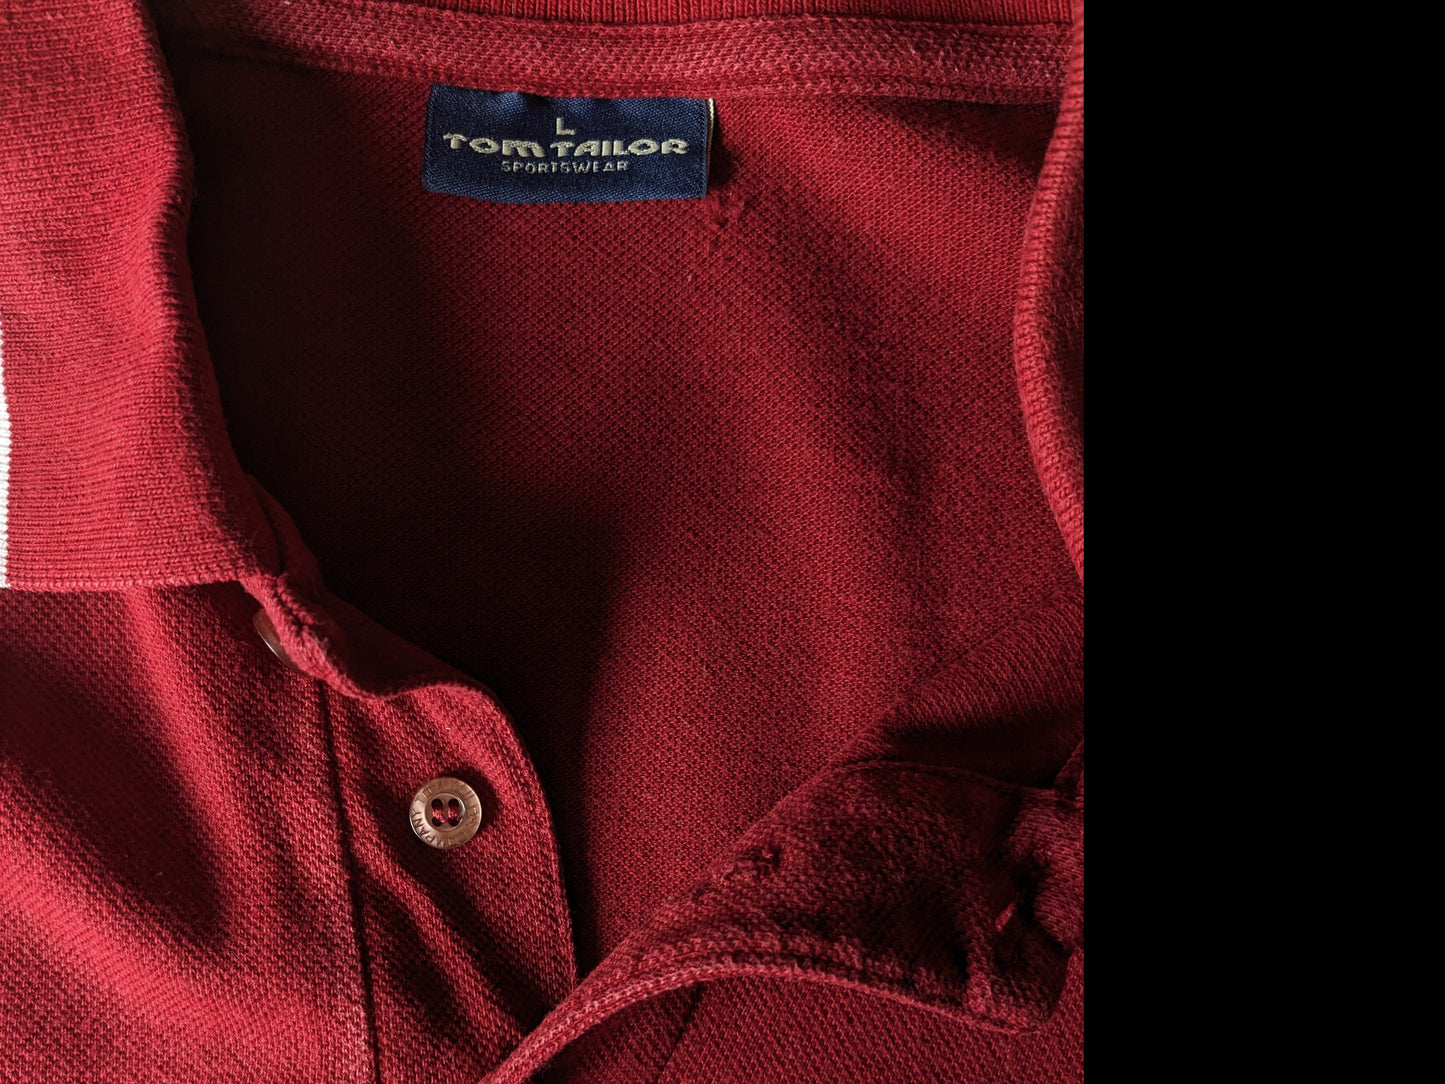 Tom Tailor Polo. Dark red colored. Size L.